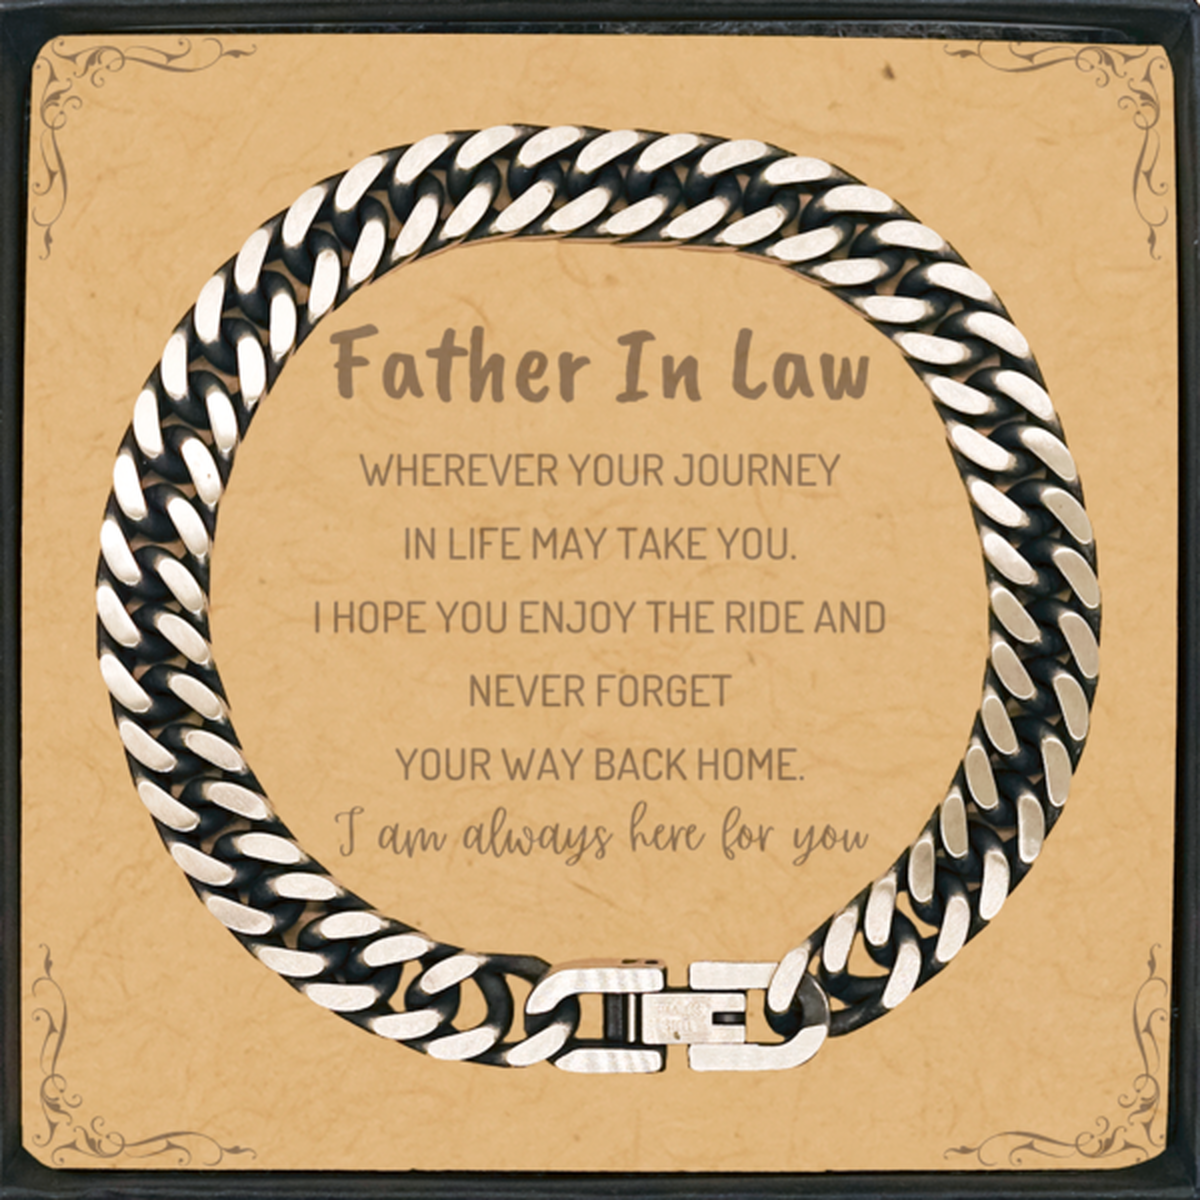 Father In Law wherever your journey in life may take you, I am always here for you Father In Law Cuban Link Chain Bracelet, Awesome Christmas Gifts For Father In Law Message Card, Father In Law Birthday Gifts for Men Women Family Loved One